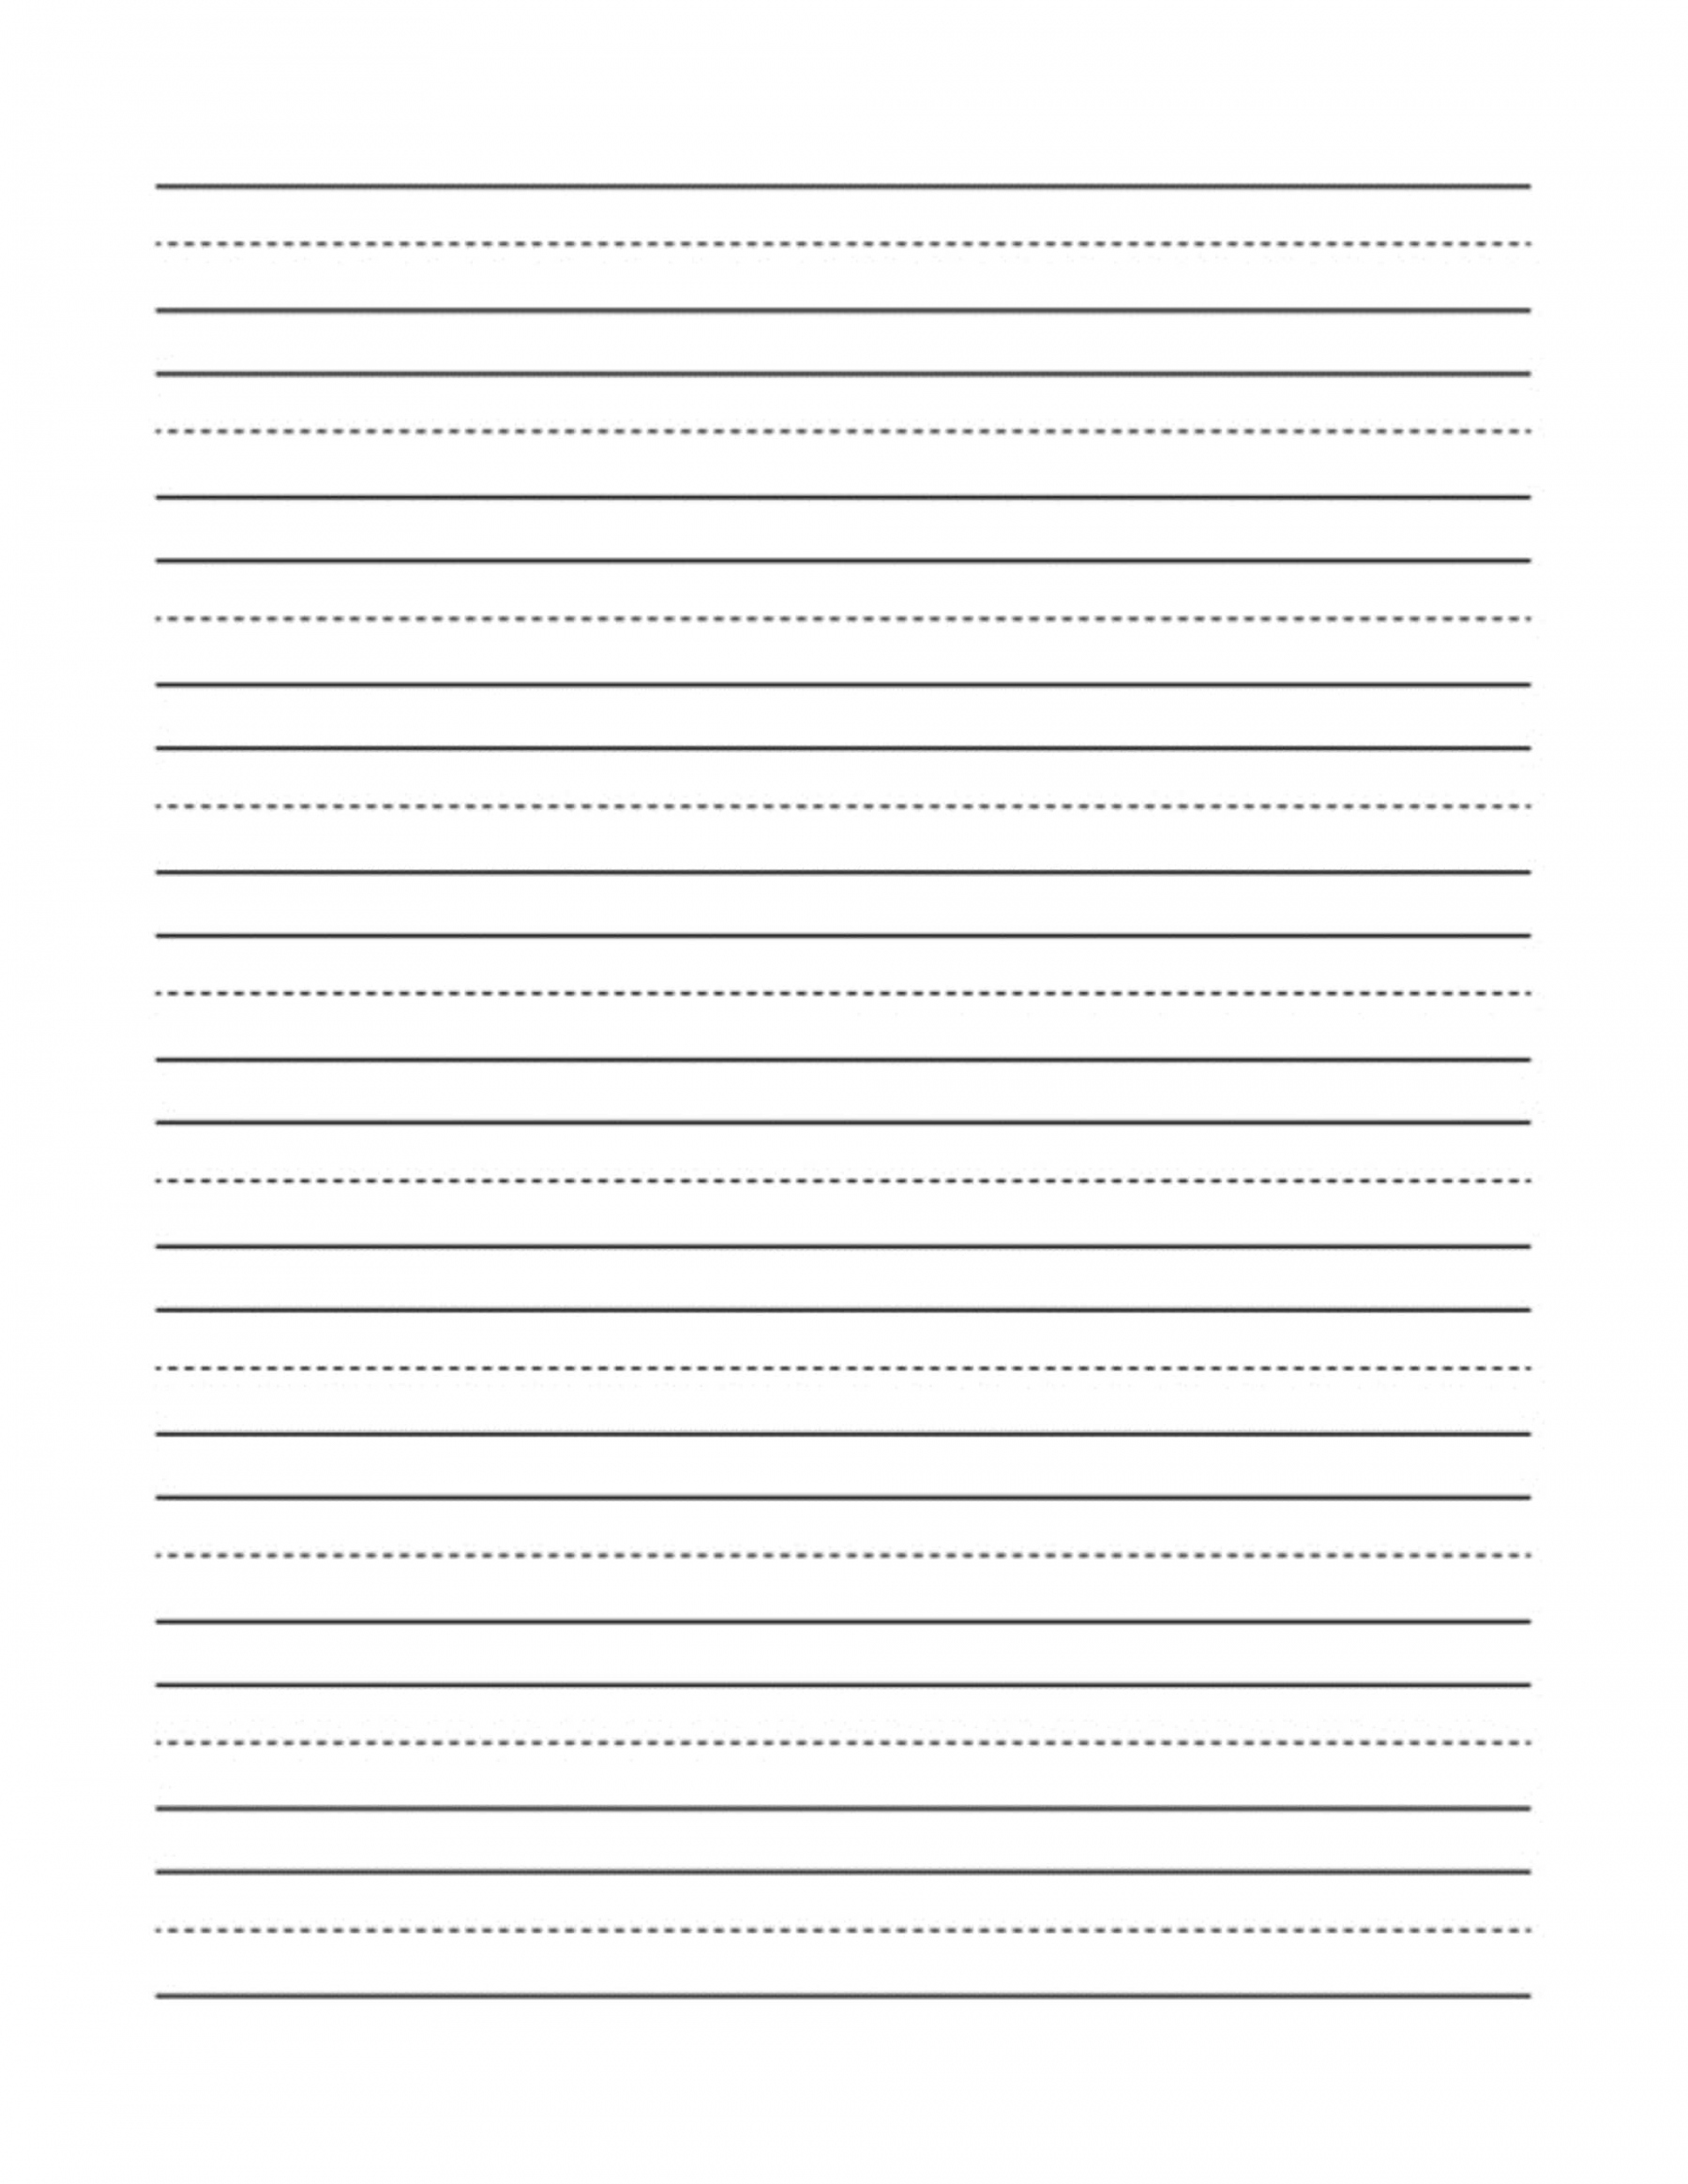 Cursive Handwriting Practice Paper Printable Download For Boys Girls and  Adults - FREE Printables - Cursive Writing Paper